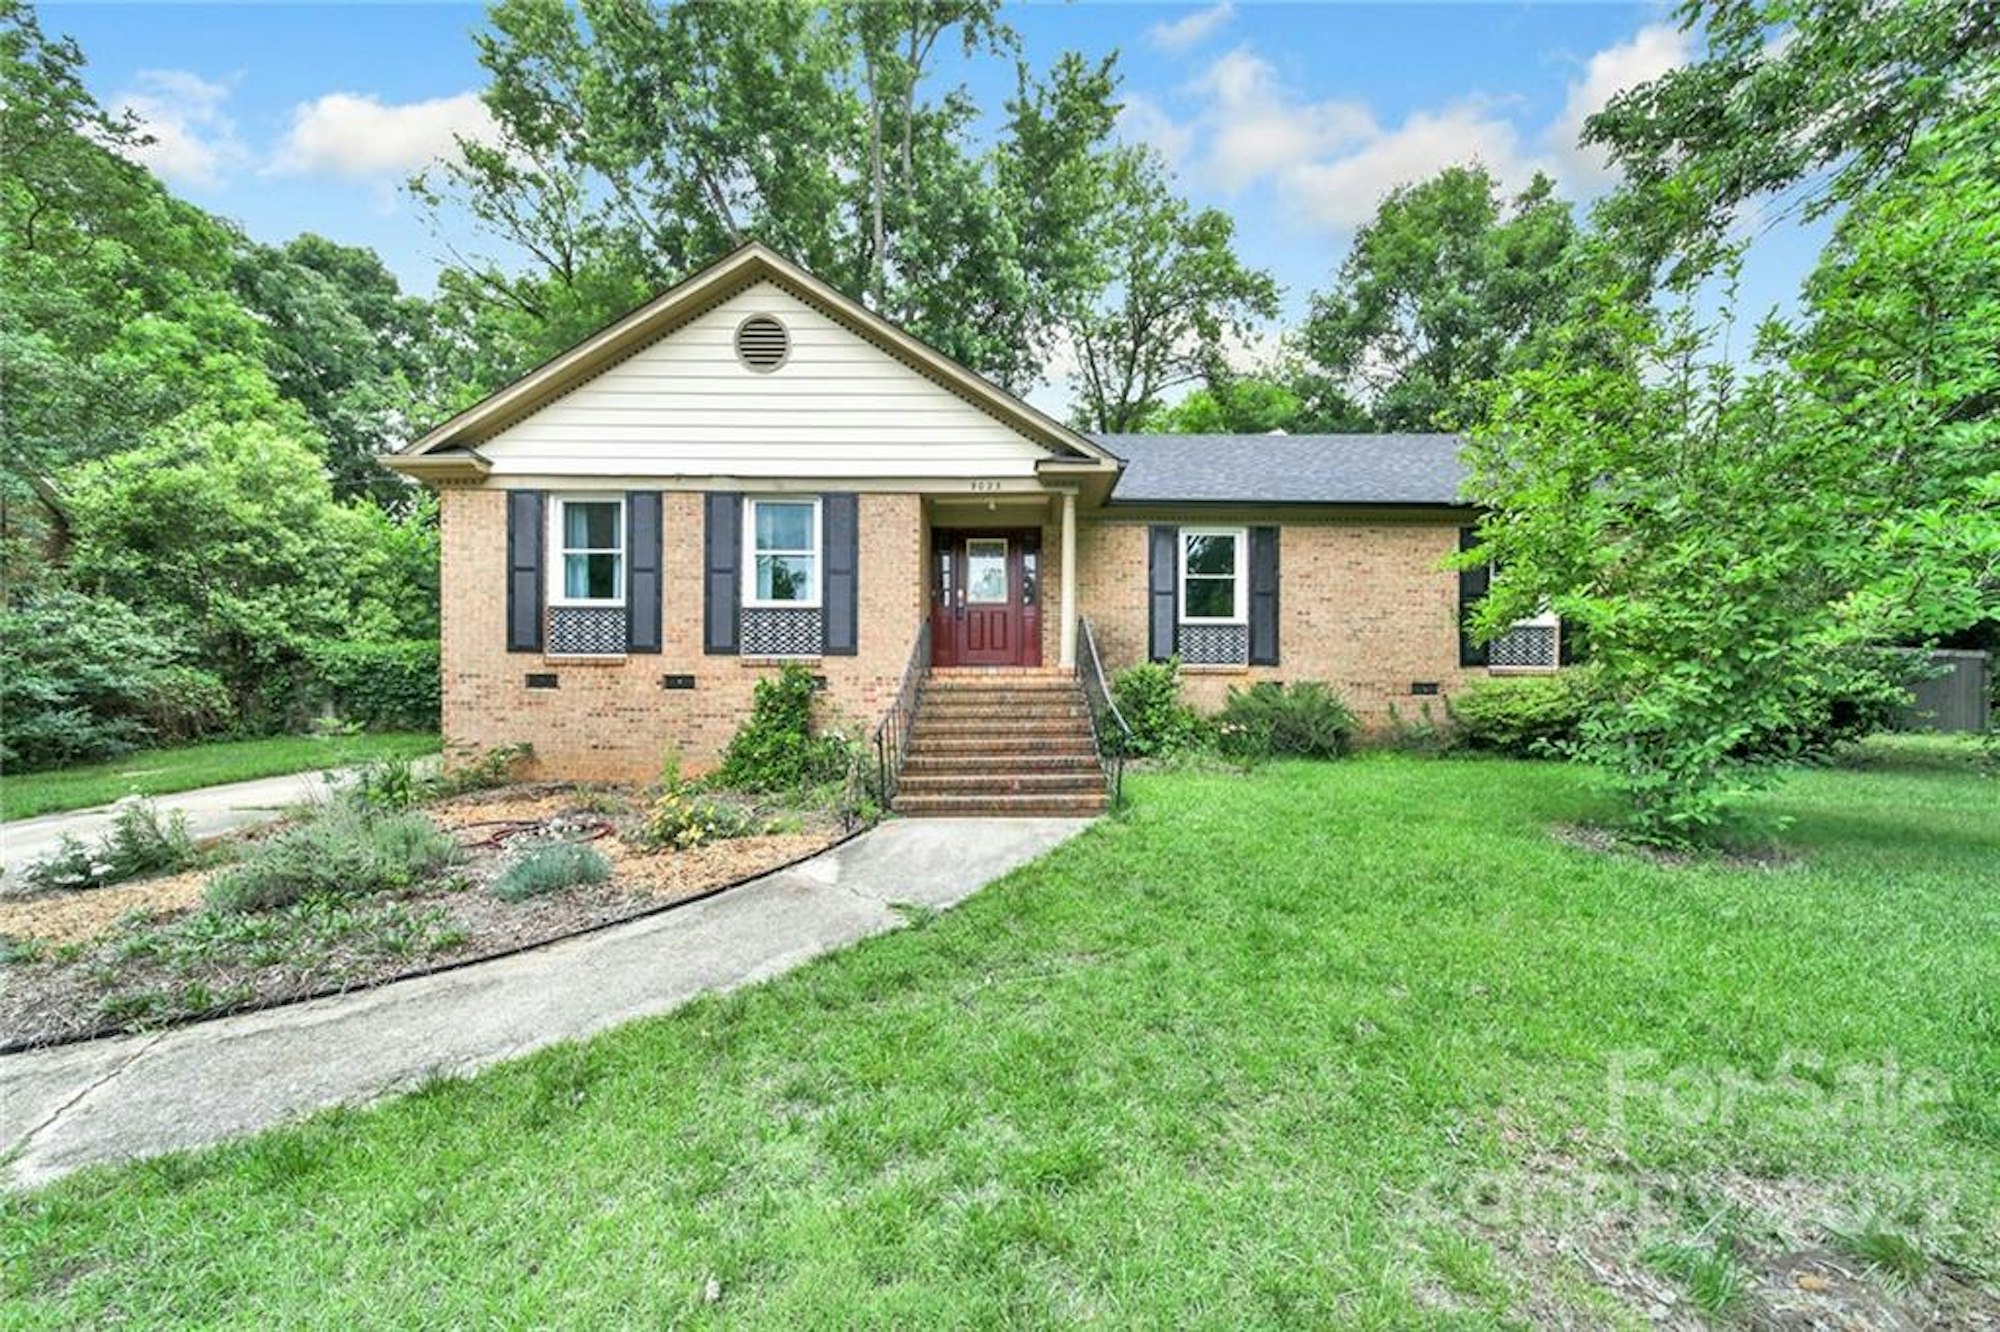 Photo 1 of 29 - 9023 Nottoway Dr, Charlotte, NC 28213